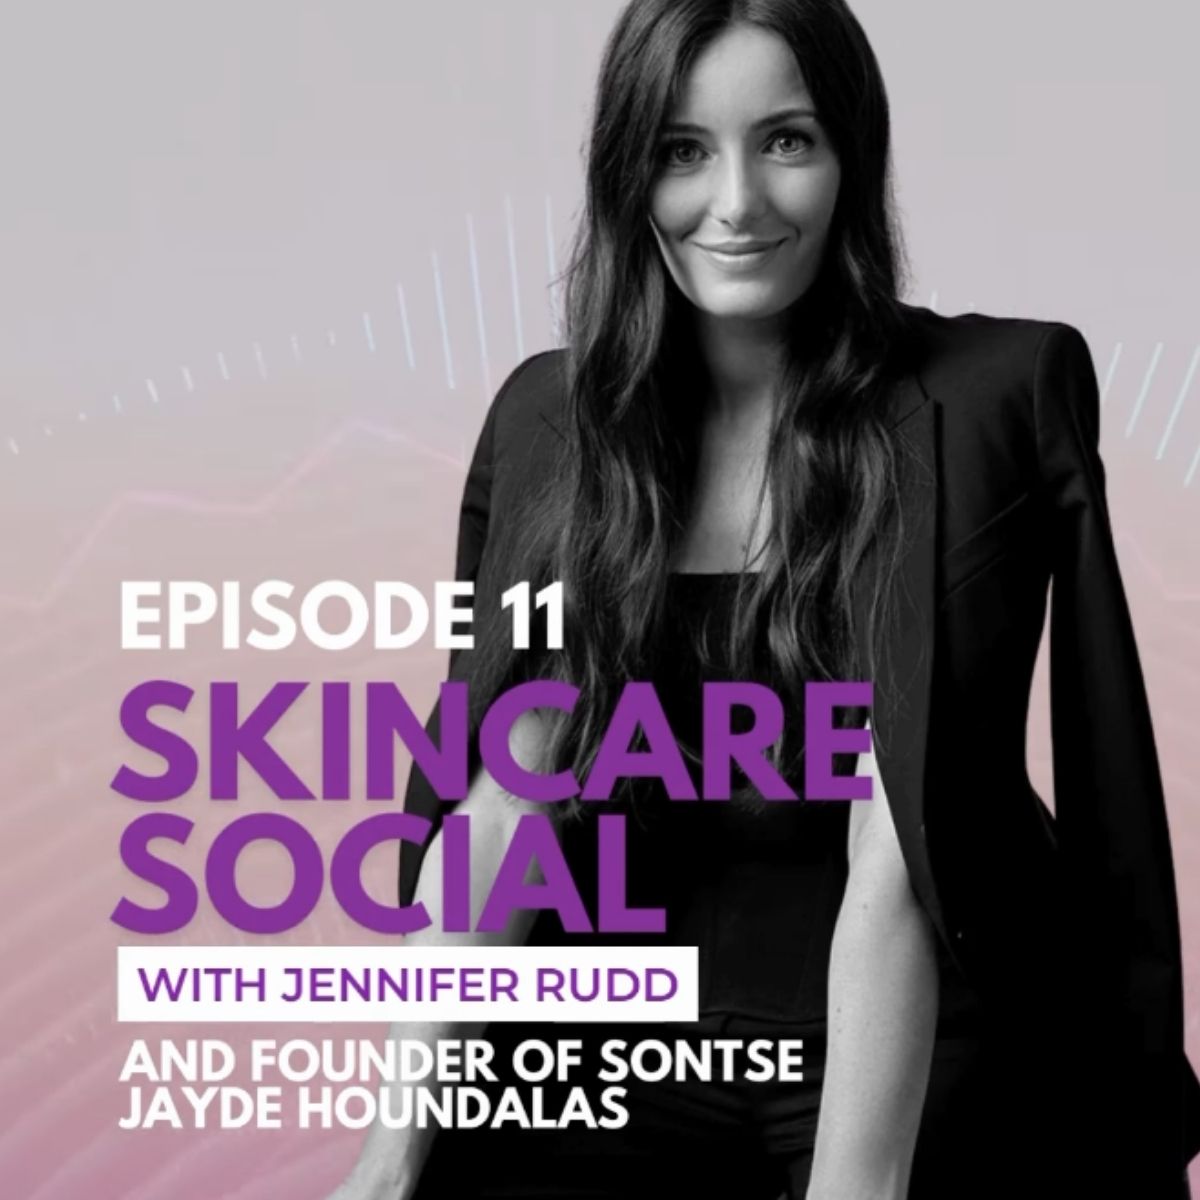 Creating a sunless tanning brand with a purpose - with Jayde Houndalas, Sontse